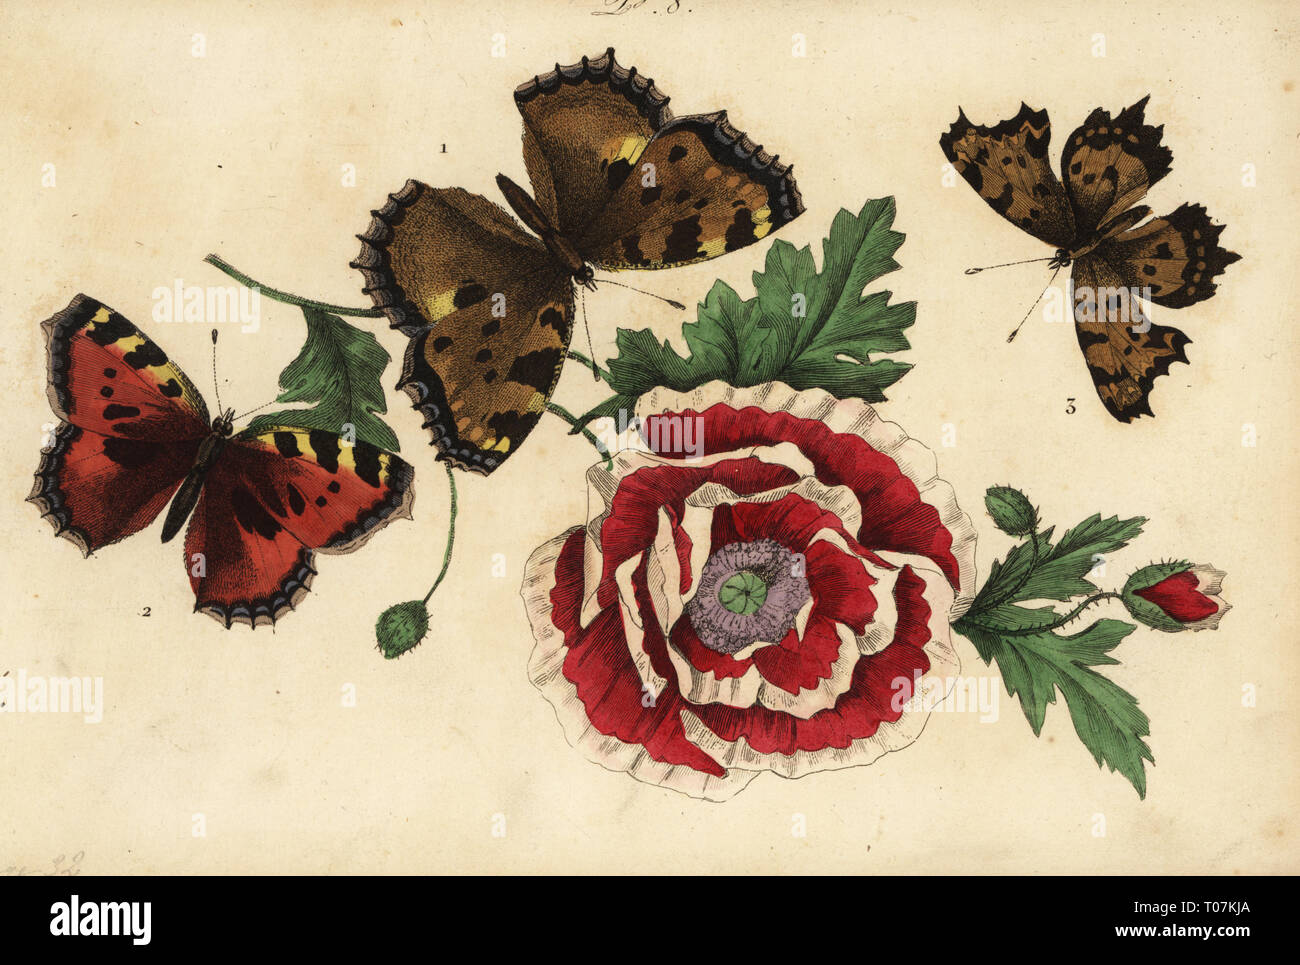 Large tortoiseshell, Nymphalis polychloros 1, small tortoiseshell, Aglais urticae 2, and comma butterfly, Polygonia c-album 3, with poppy. Vanesse grande tortue, Vanesse petite tortue, Vanesse gamma. Handcoloured lithograph from Musee du Naturaliste dedie a la Jeunesse, Histoire des Papillons, Hippolyte and Polydor Pauquet, Paris, 1833. Stock Photo